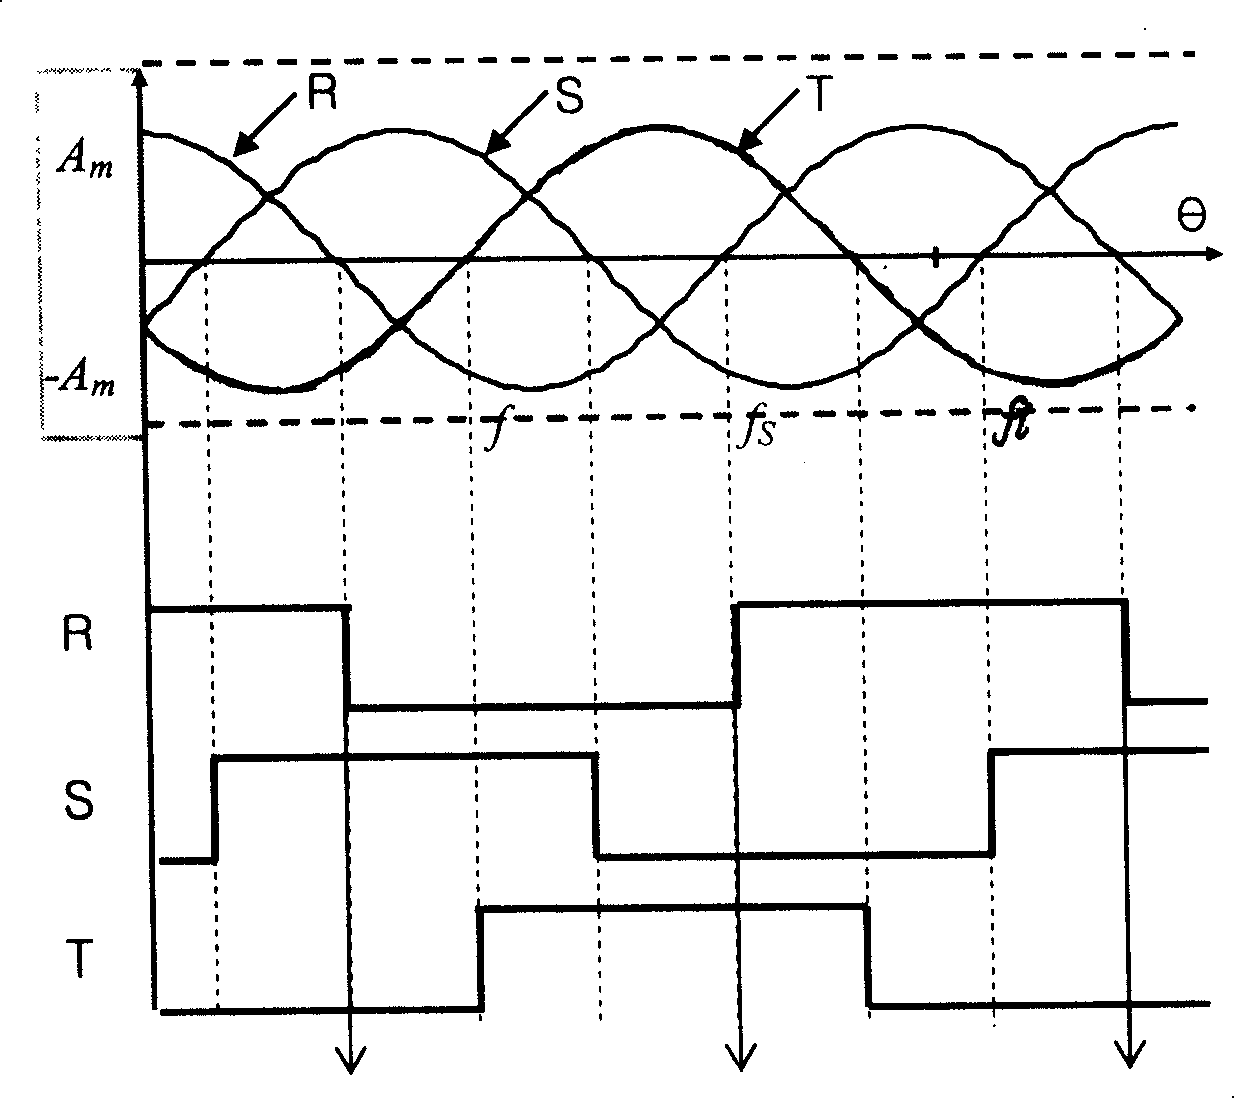 Compressor three phase voltage phase sequence detection method